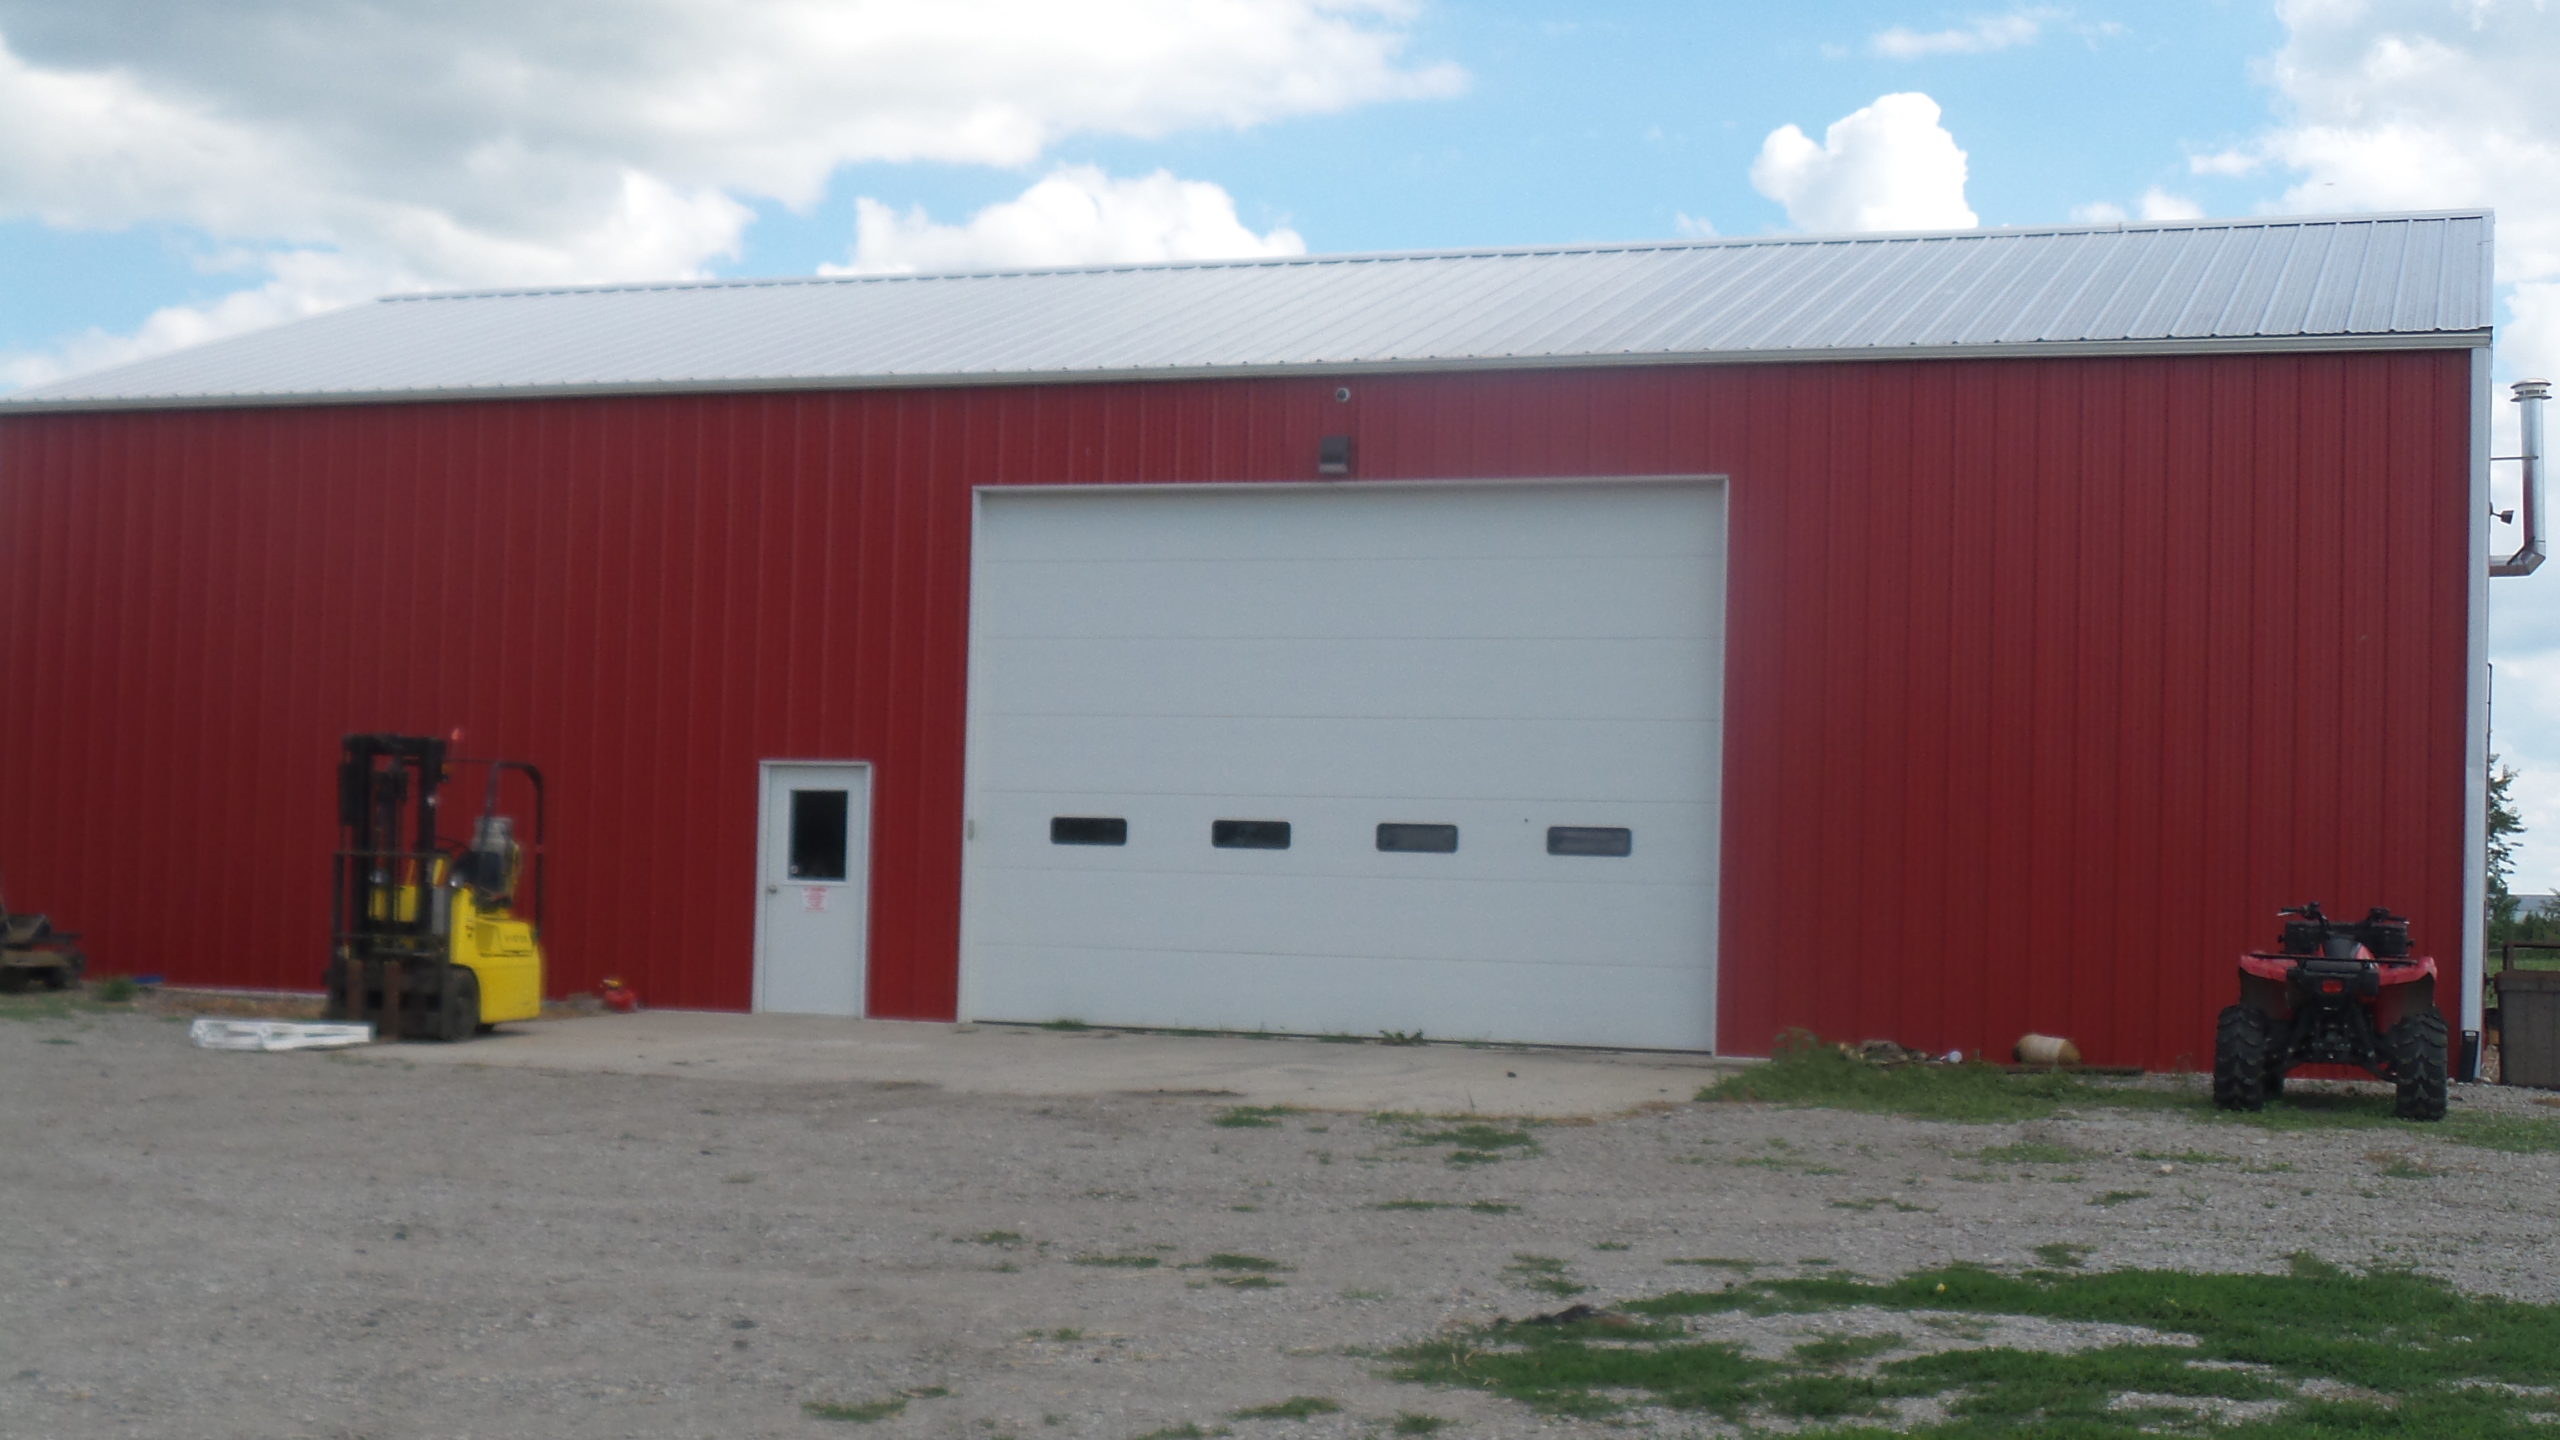 red barn showing security camera for business